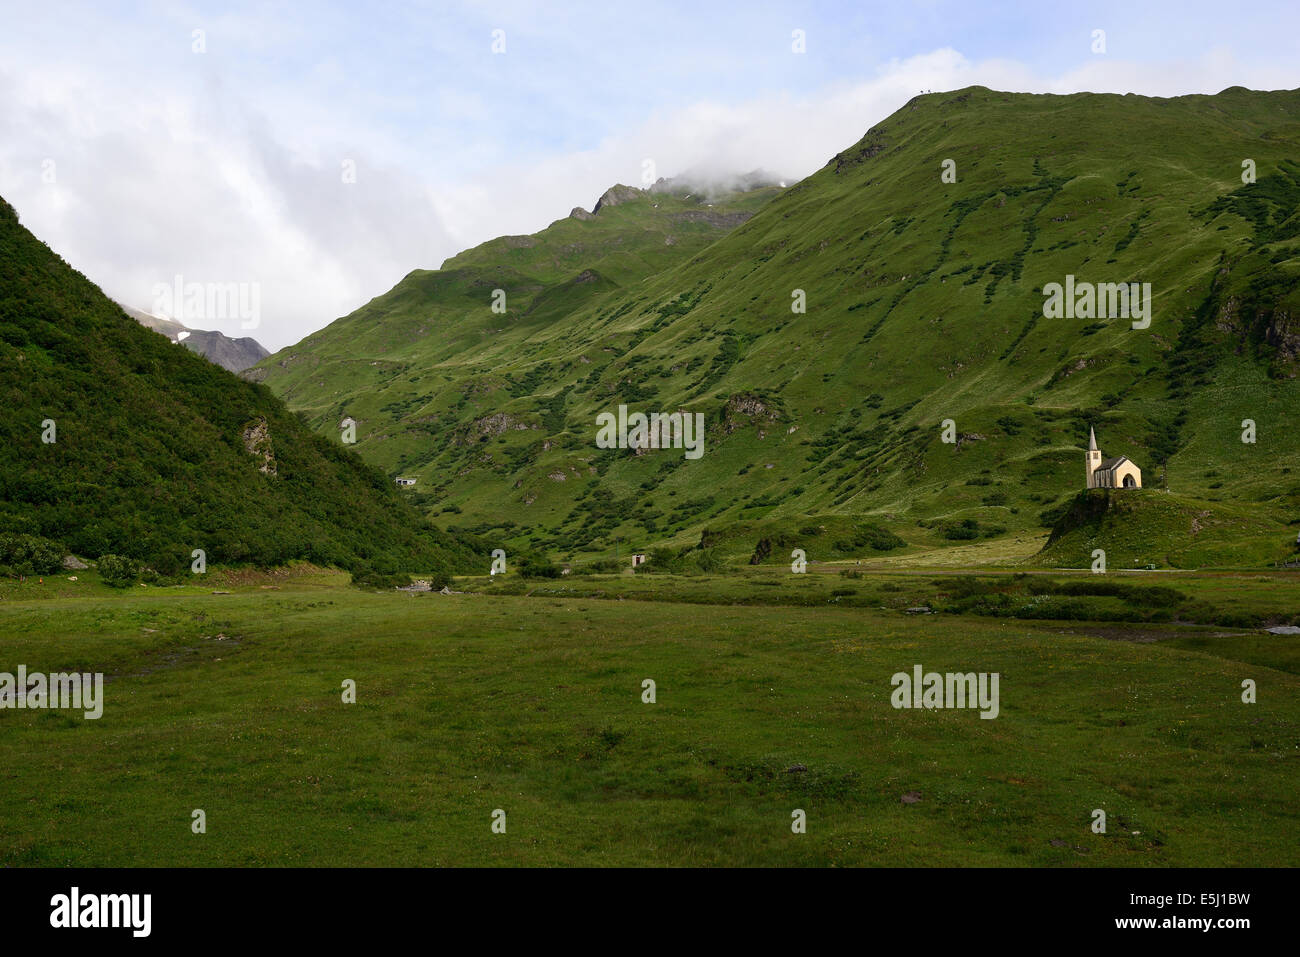 Isolated church in a grassy valley. Riale, Val Formazza, Province of Verbano-Cusio-Ossola, Piedmont, Italy. Stock Photo